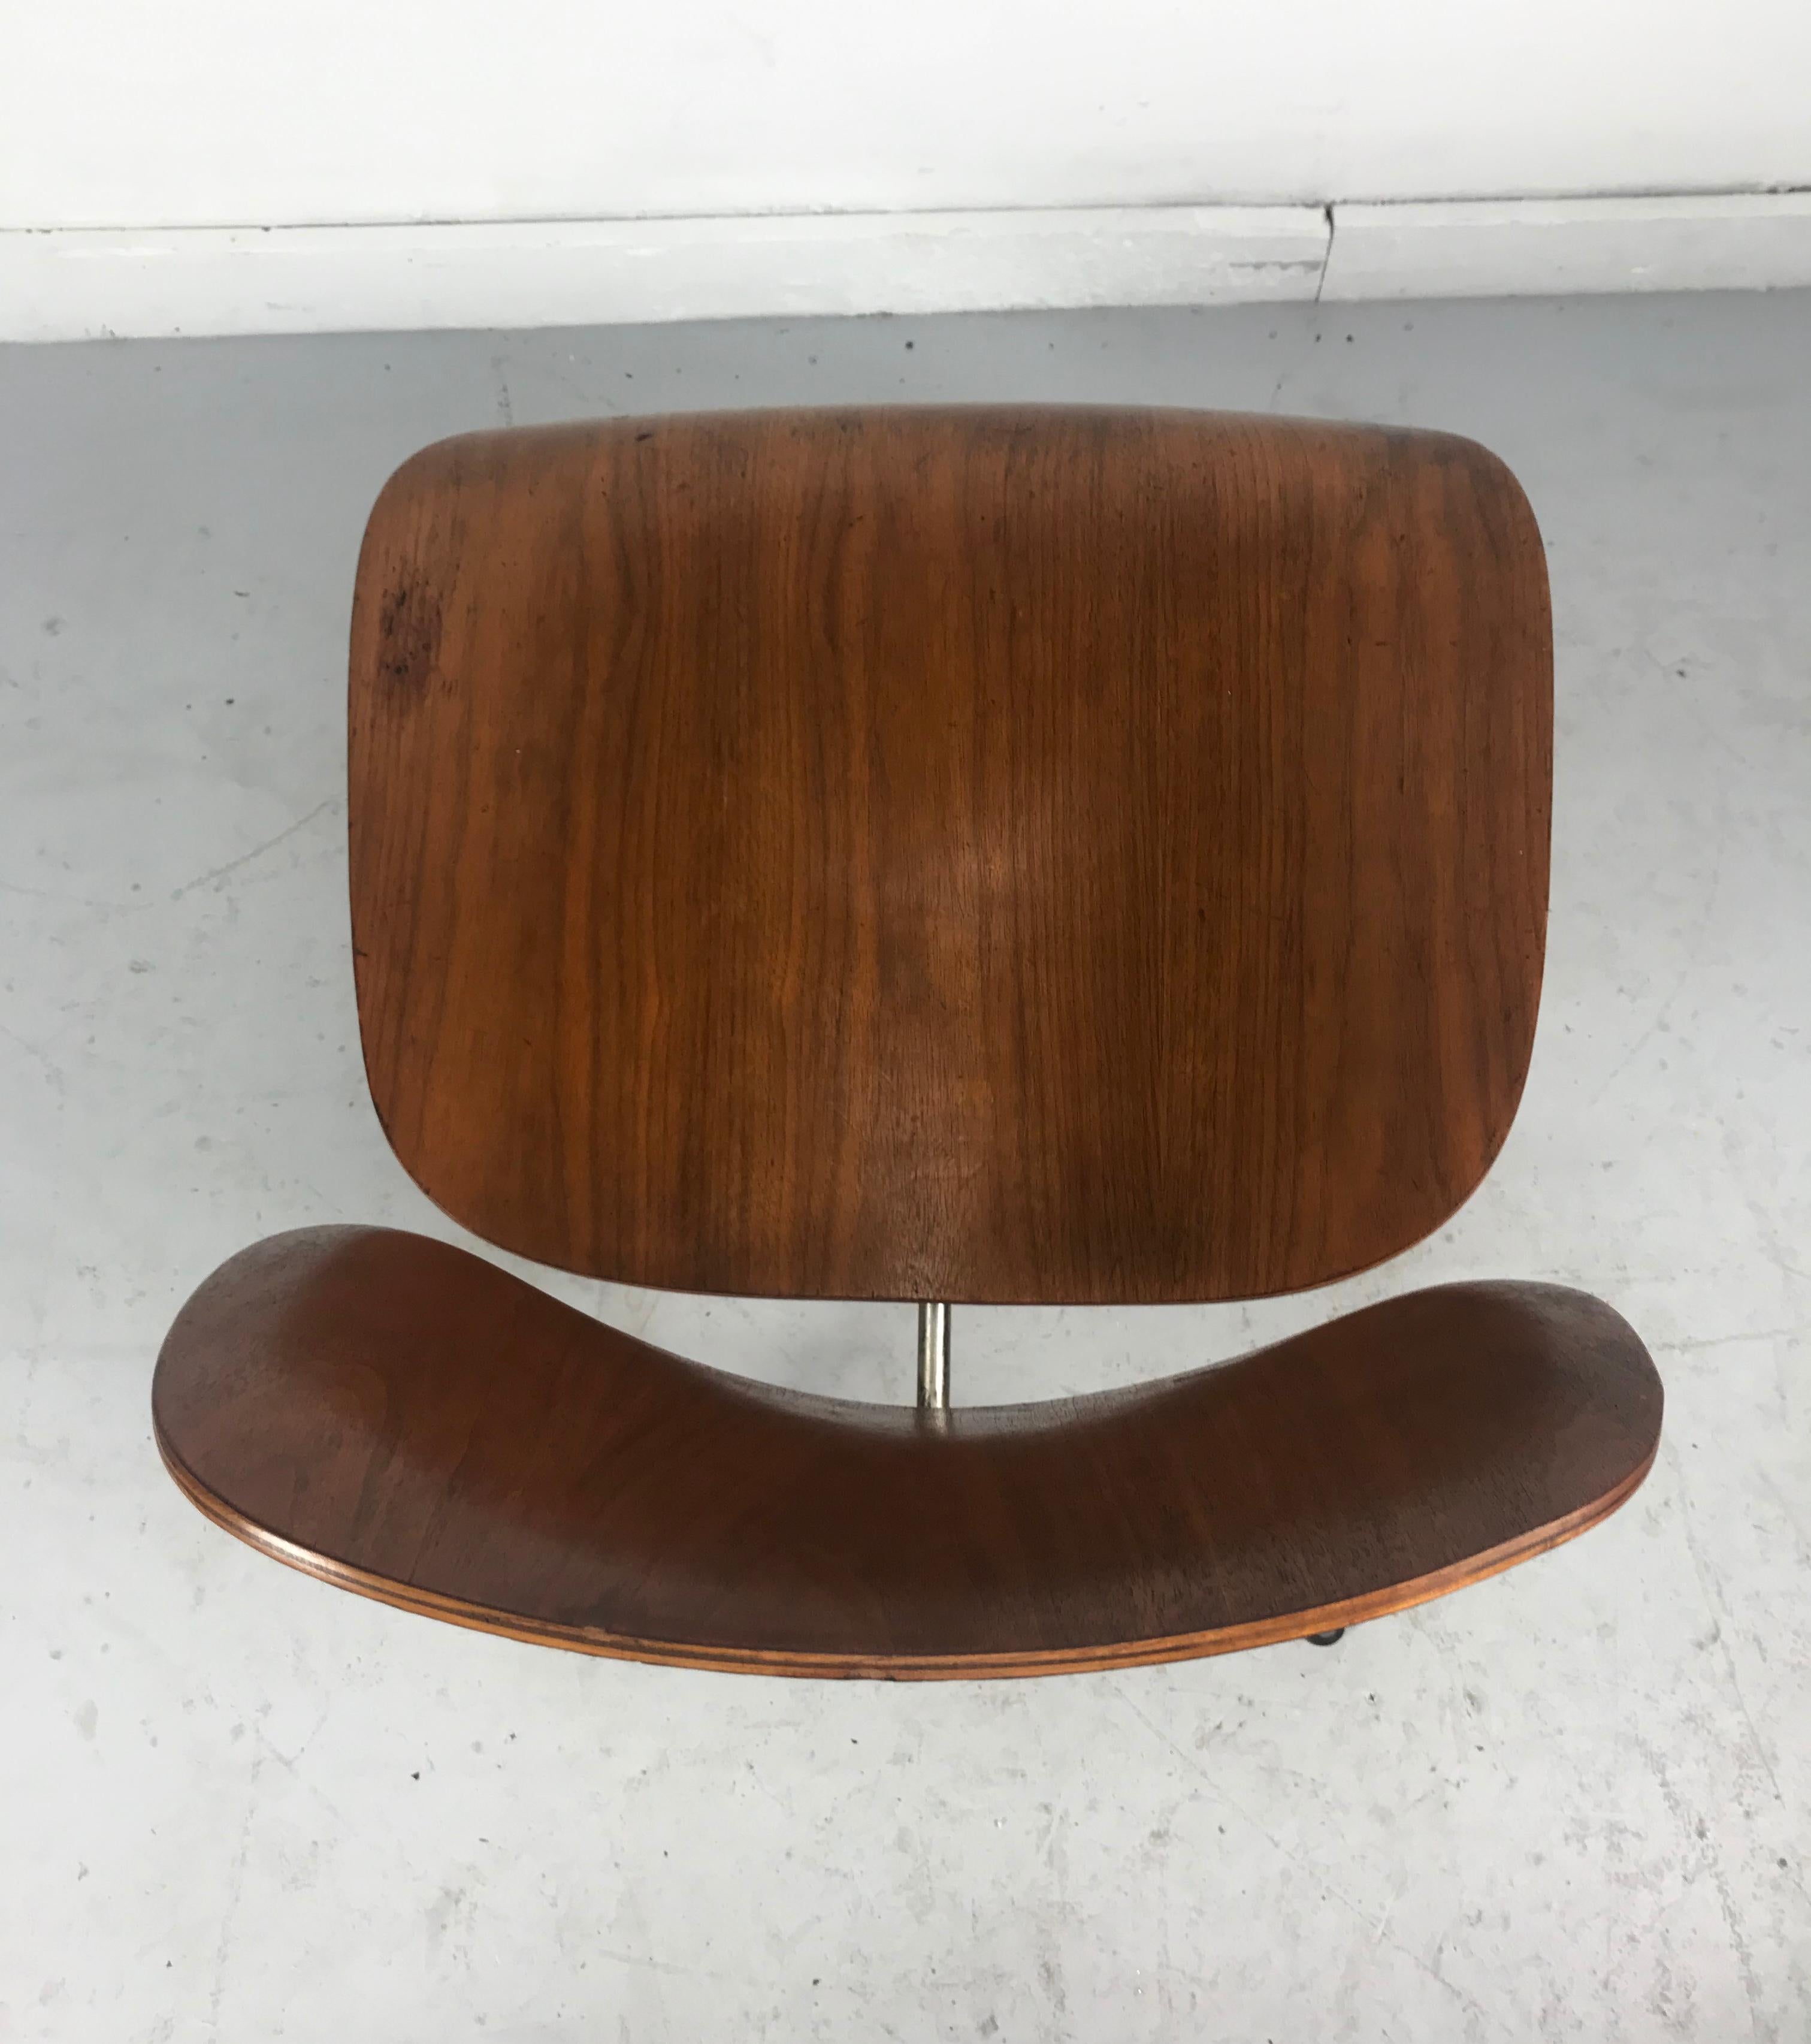 Early Production Charles Eames LCM 'Lounge Chair Metal', Original Label 2